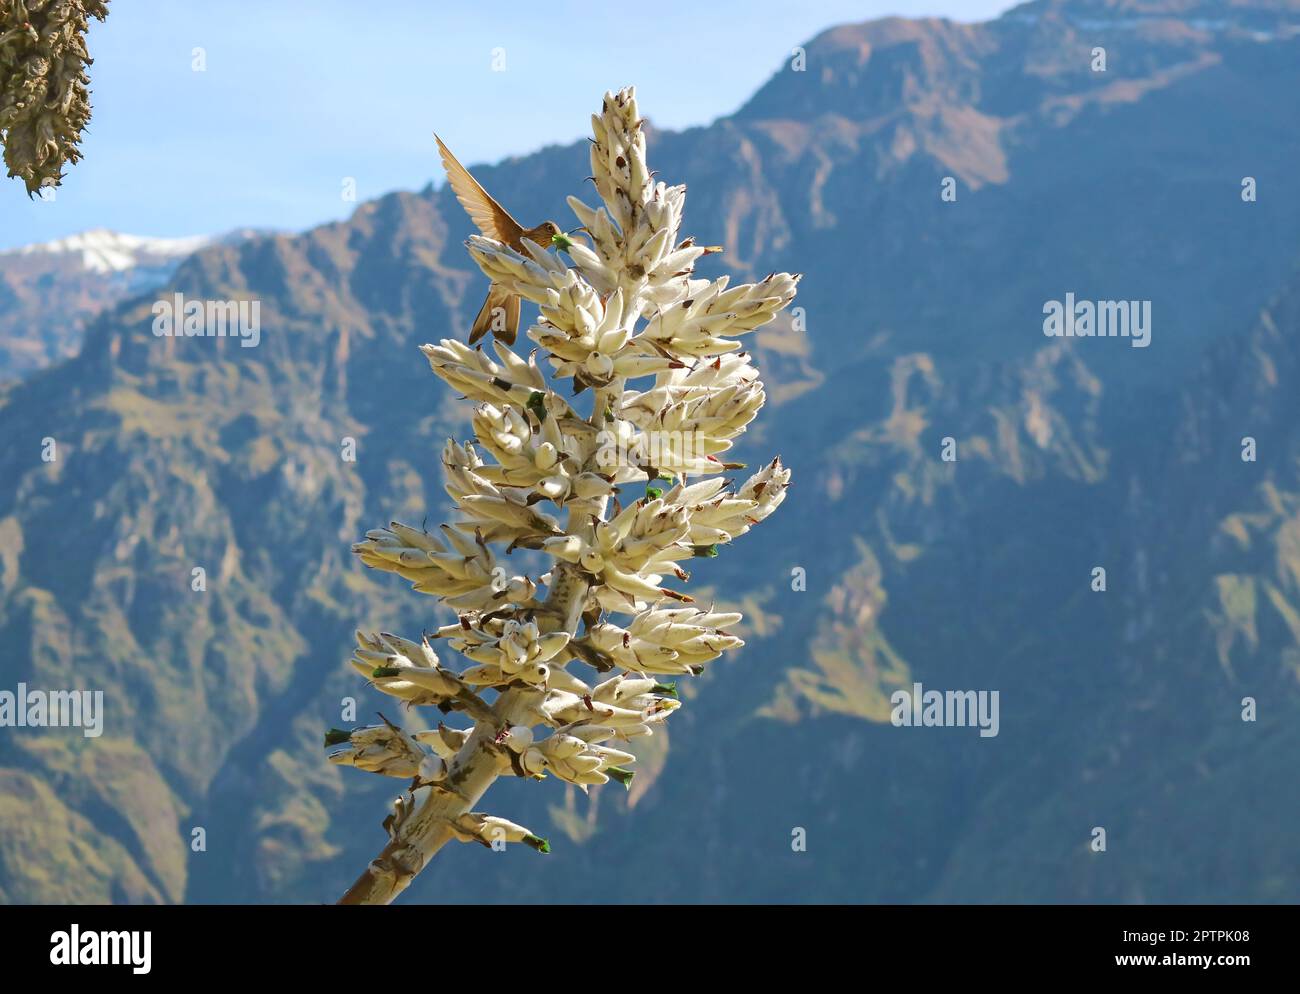 Hummingbird Collecting Nectar of Puya Weberbaueri Flower in Colca Canyon, Arequipa Region, the Andes, Peru, South America Stock Photo